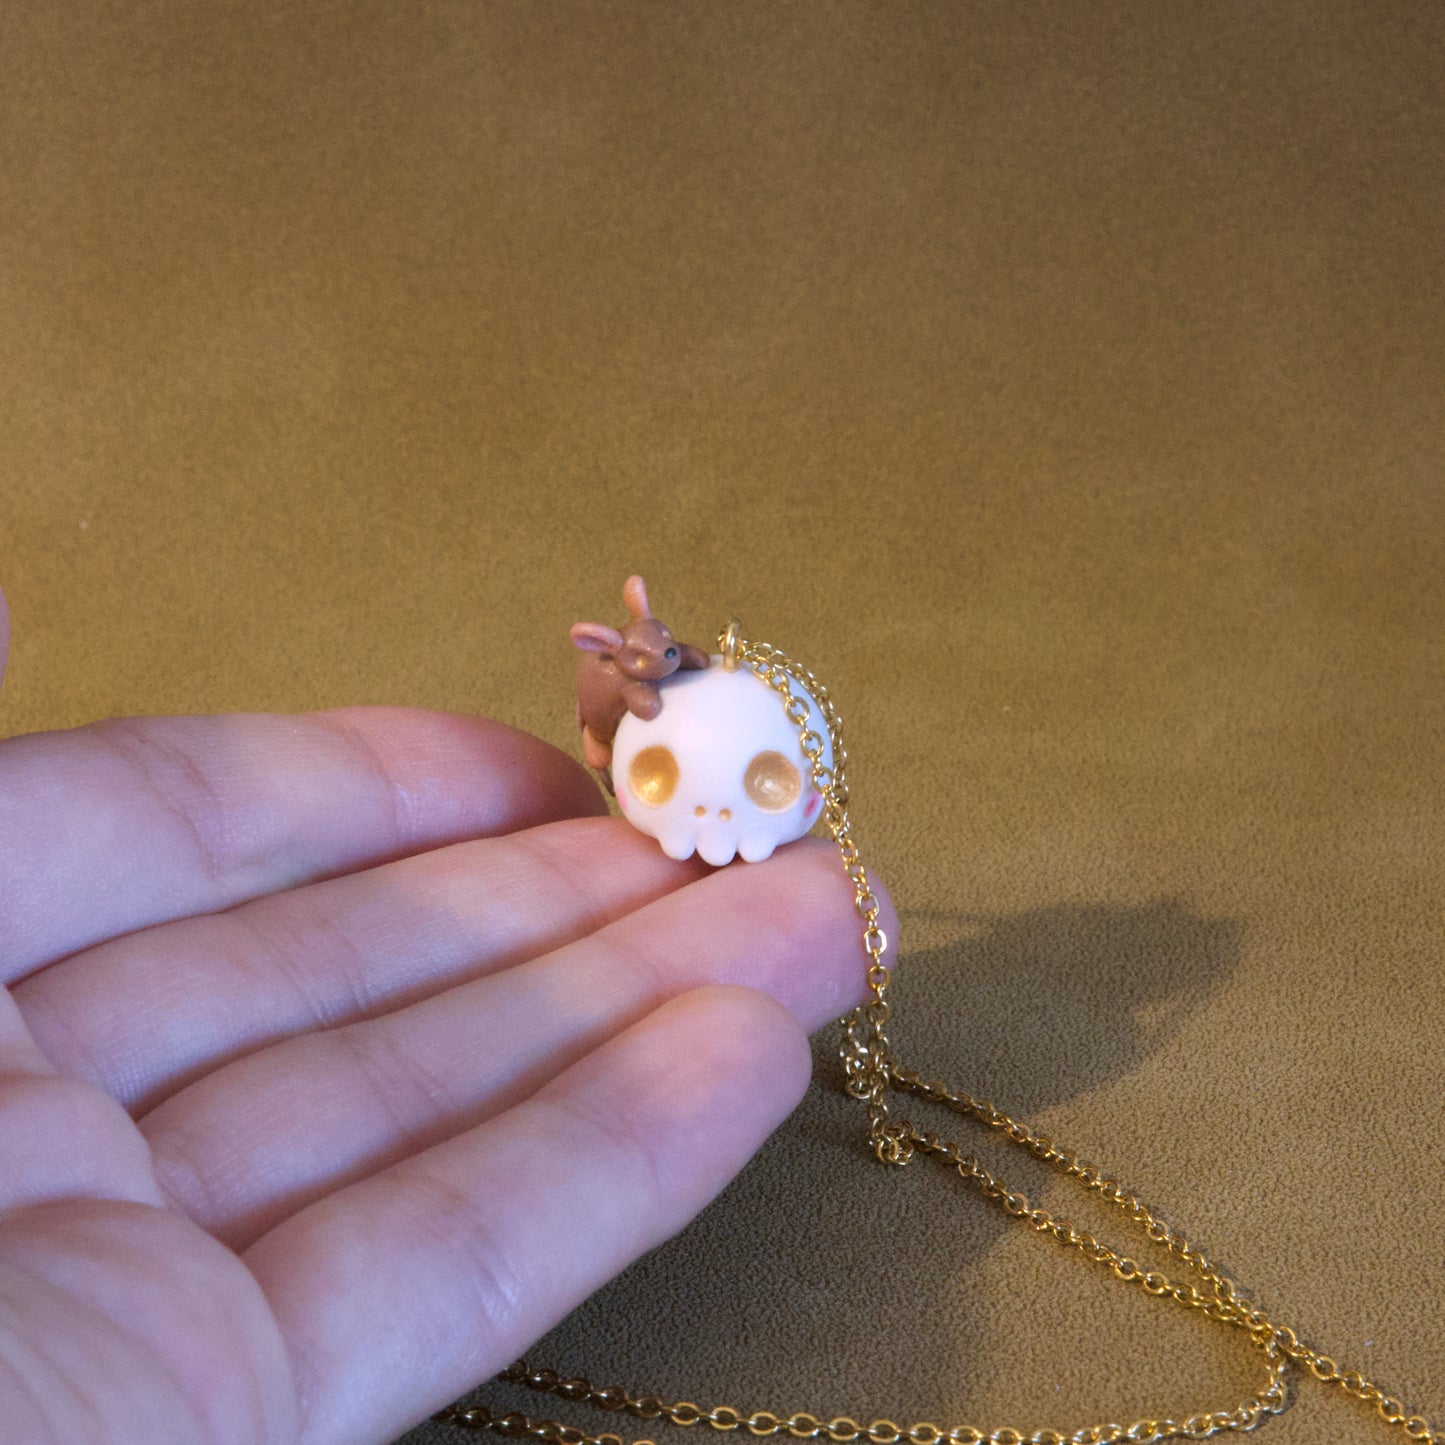 Mouse on Skull Necklace in Polymer Clay